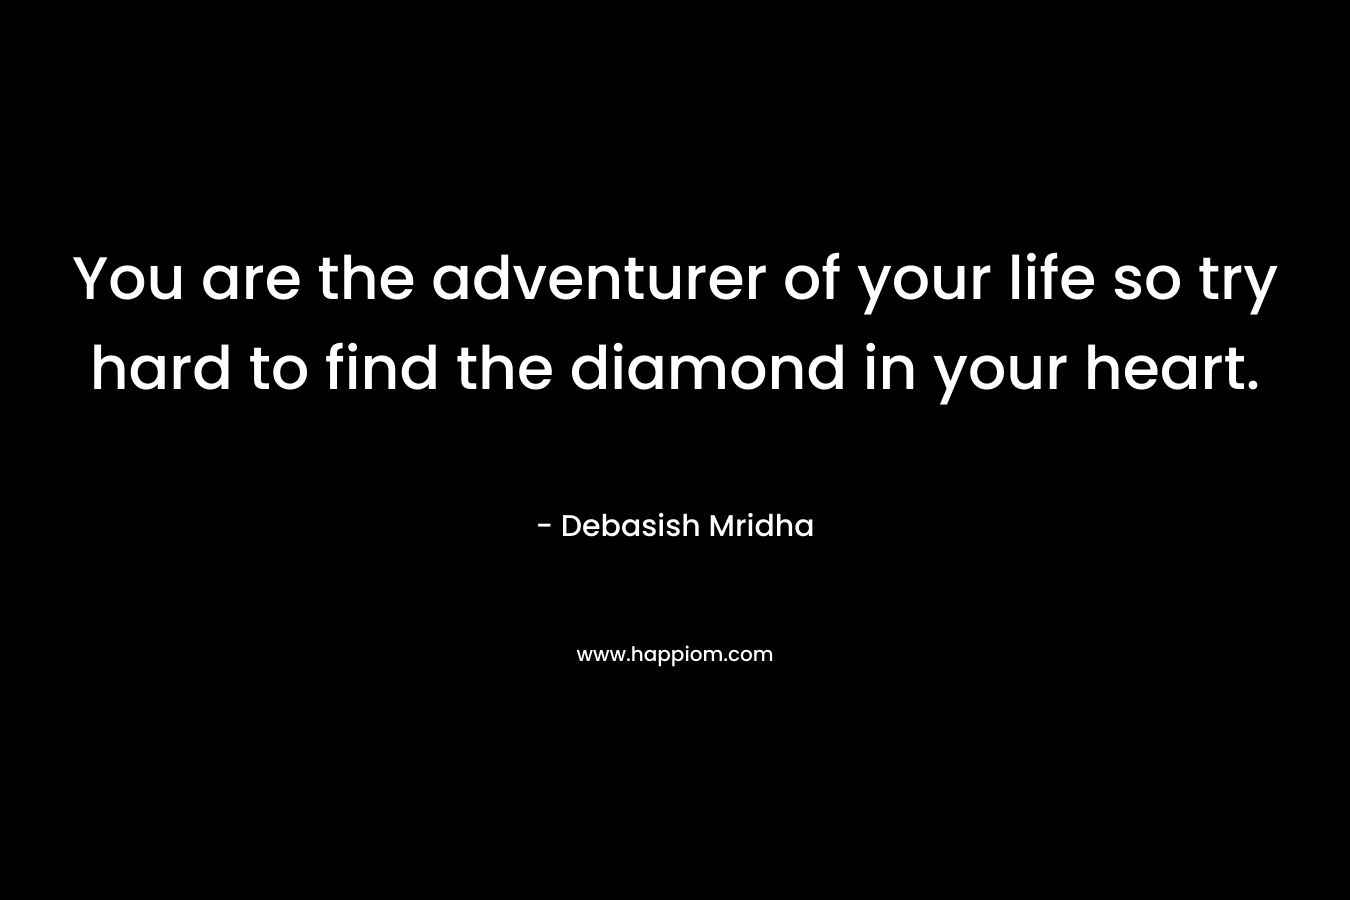 You are the adventurer of your life so try hard to find the diamond in your heart.